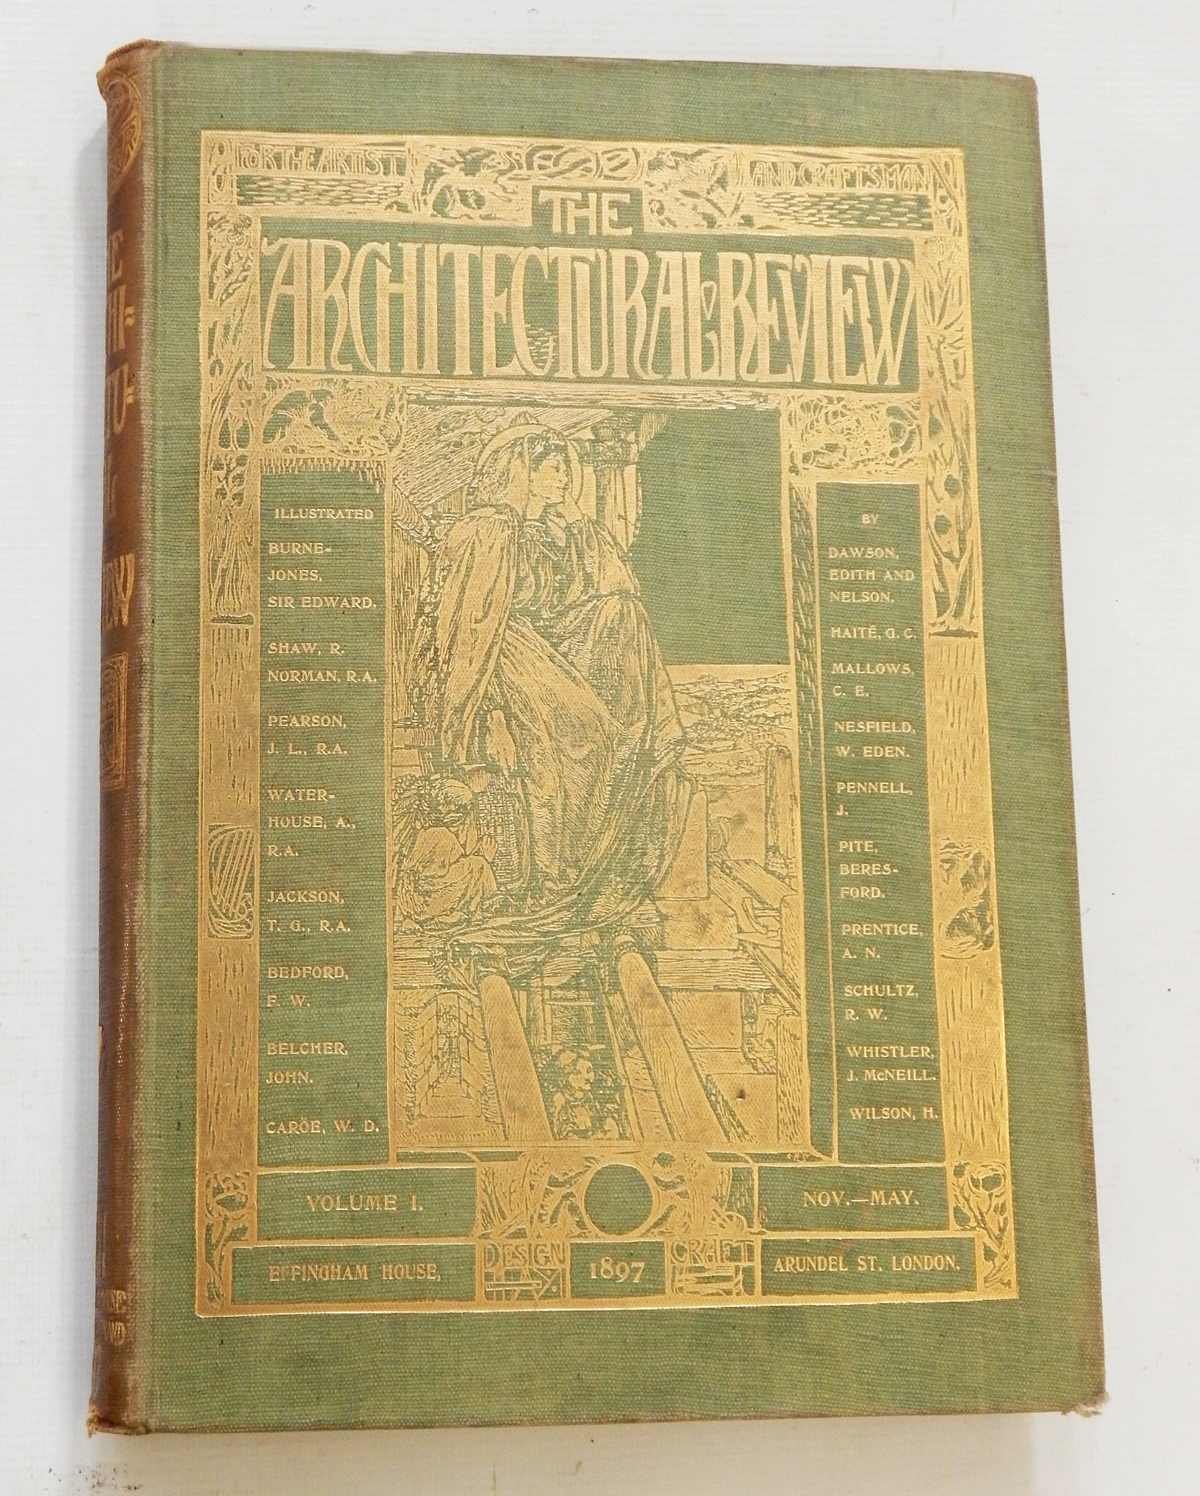 "The Architectural Review", vols 1-8 1897-1900, bound in green cloth,